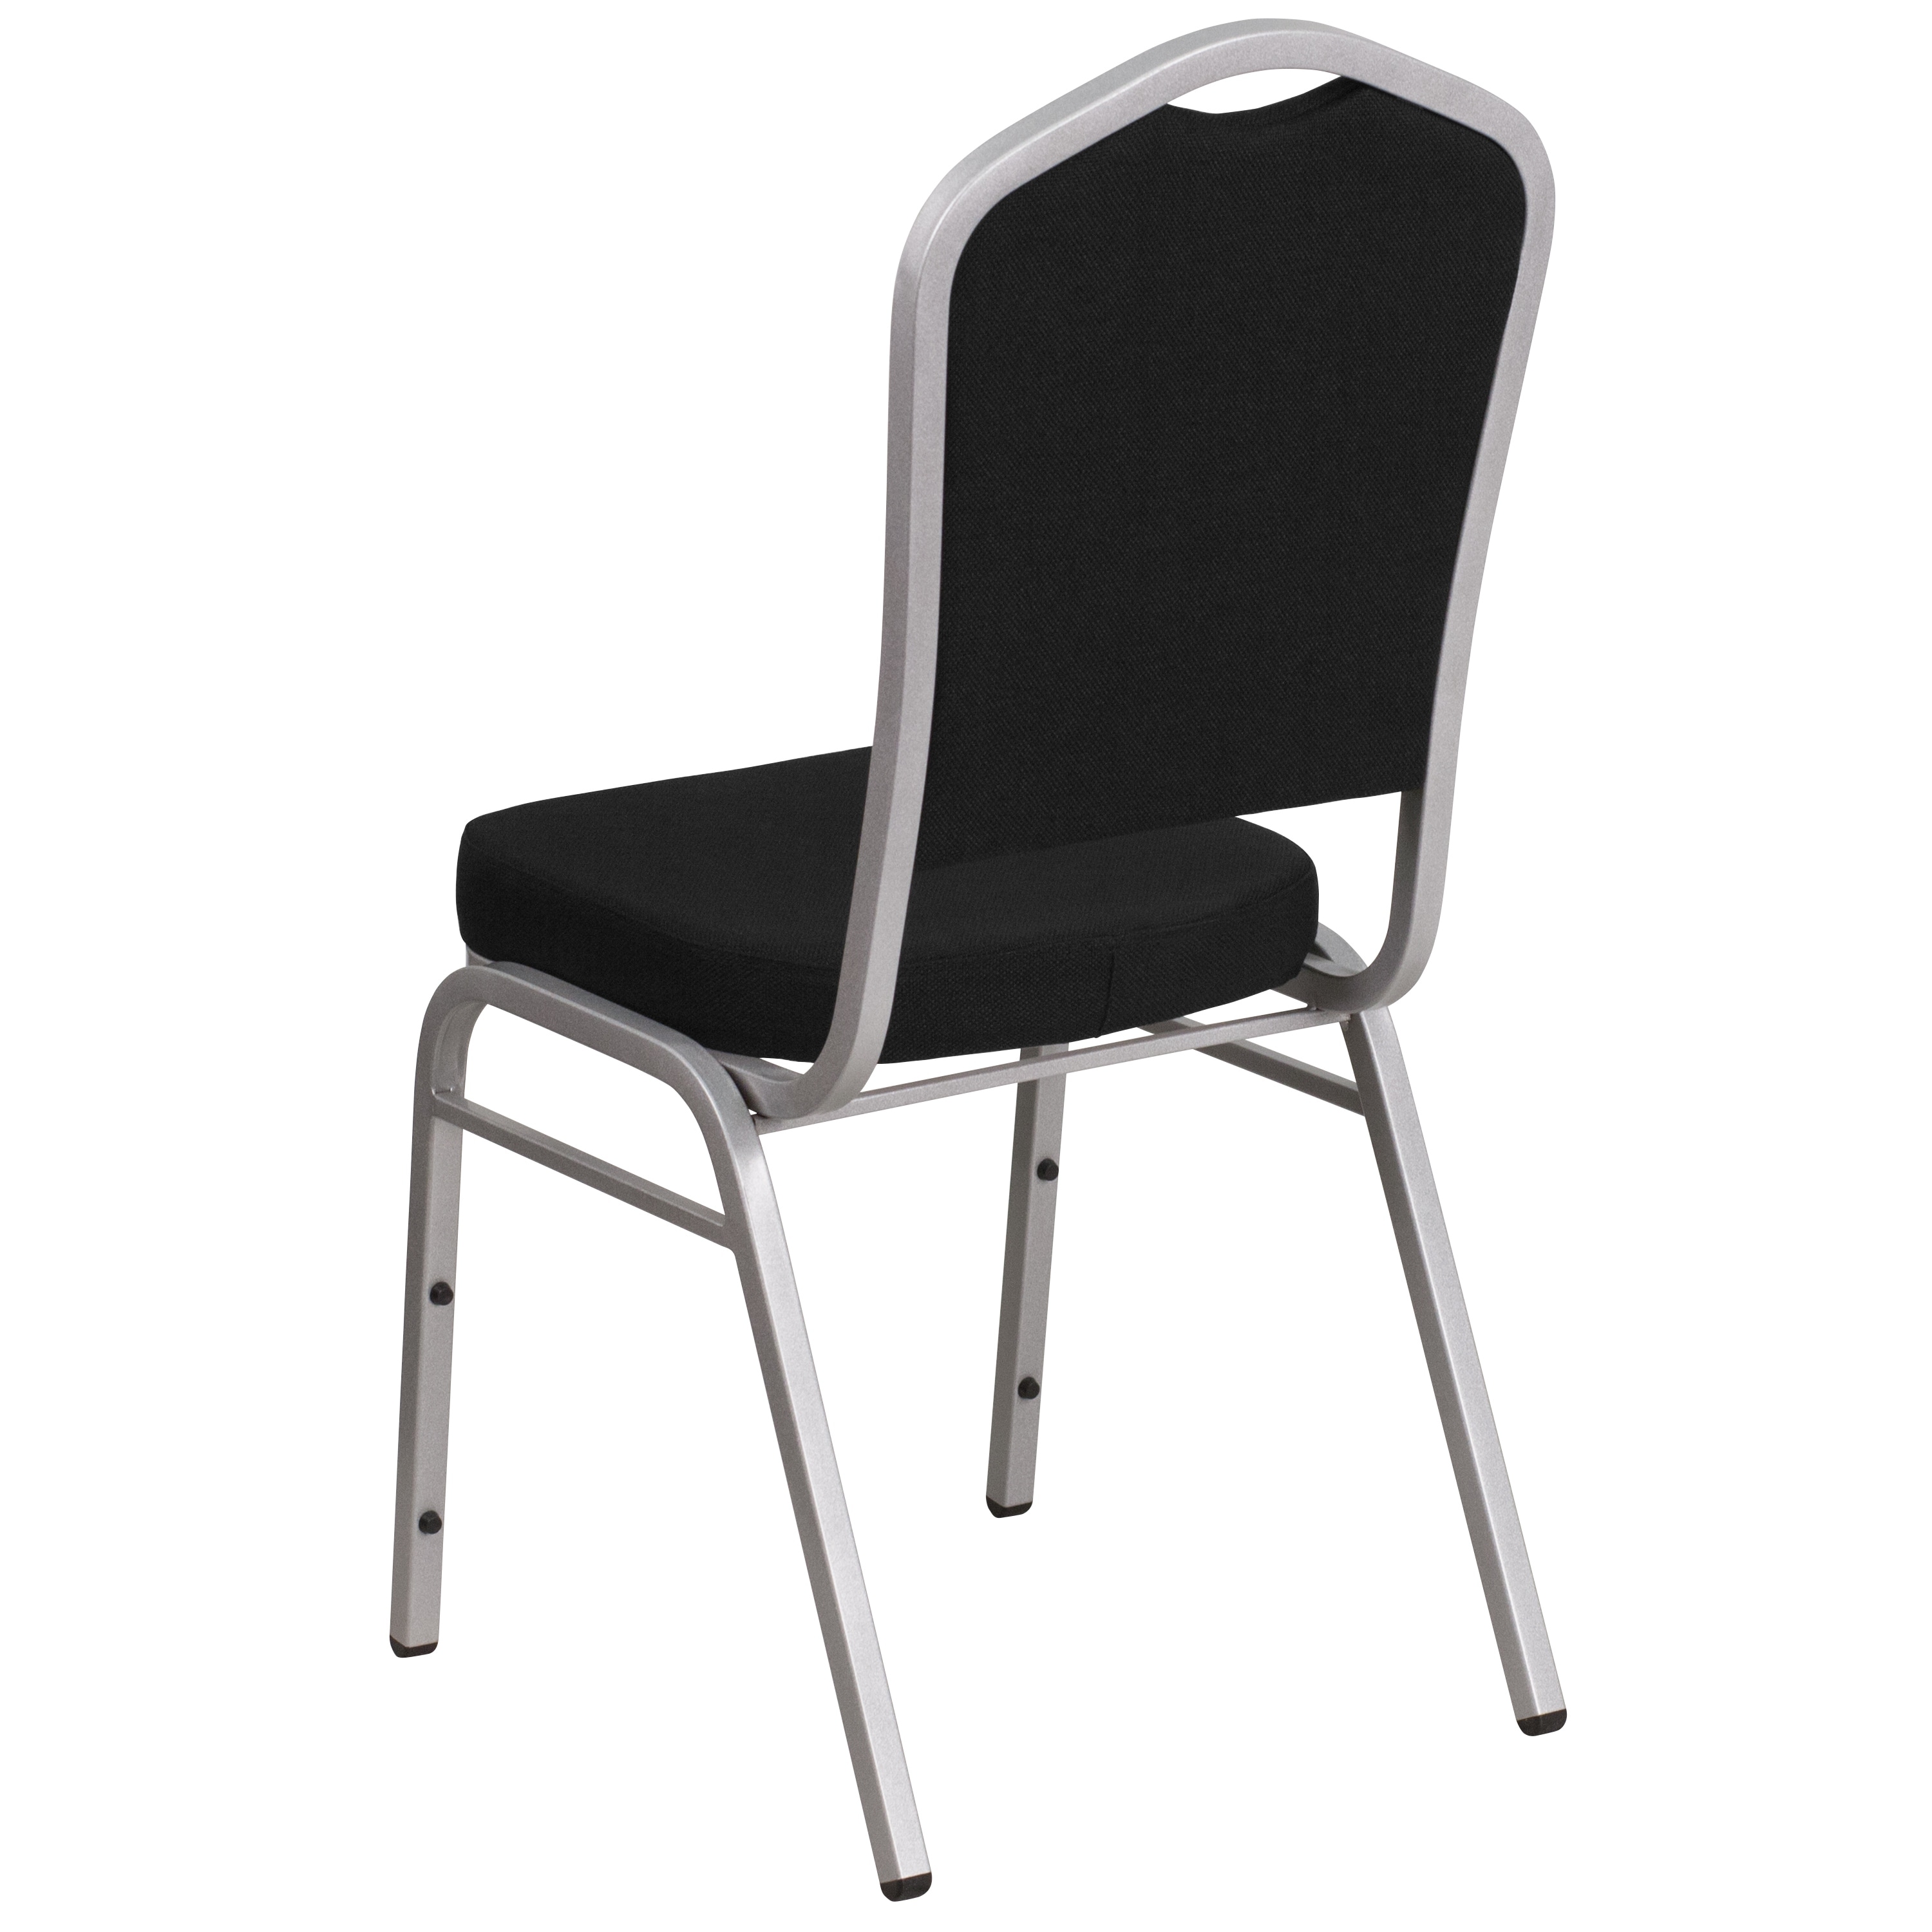 https://ak1.ostkcdn.com/images/products/is/images/direct/1ab3cda3e9d817ea0c26078a6ad965aacdfc289d/Banquet-Stack-Chair.jpg